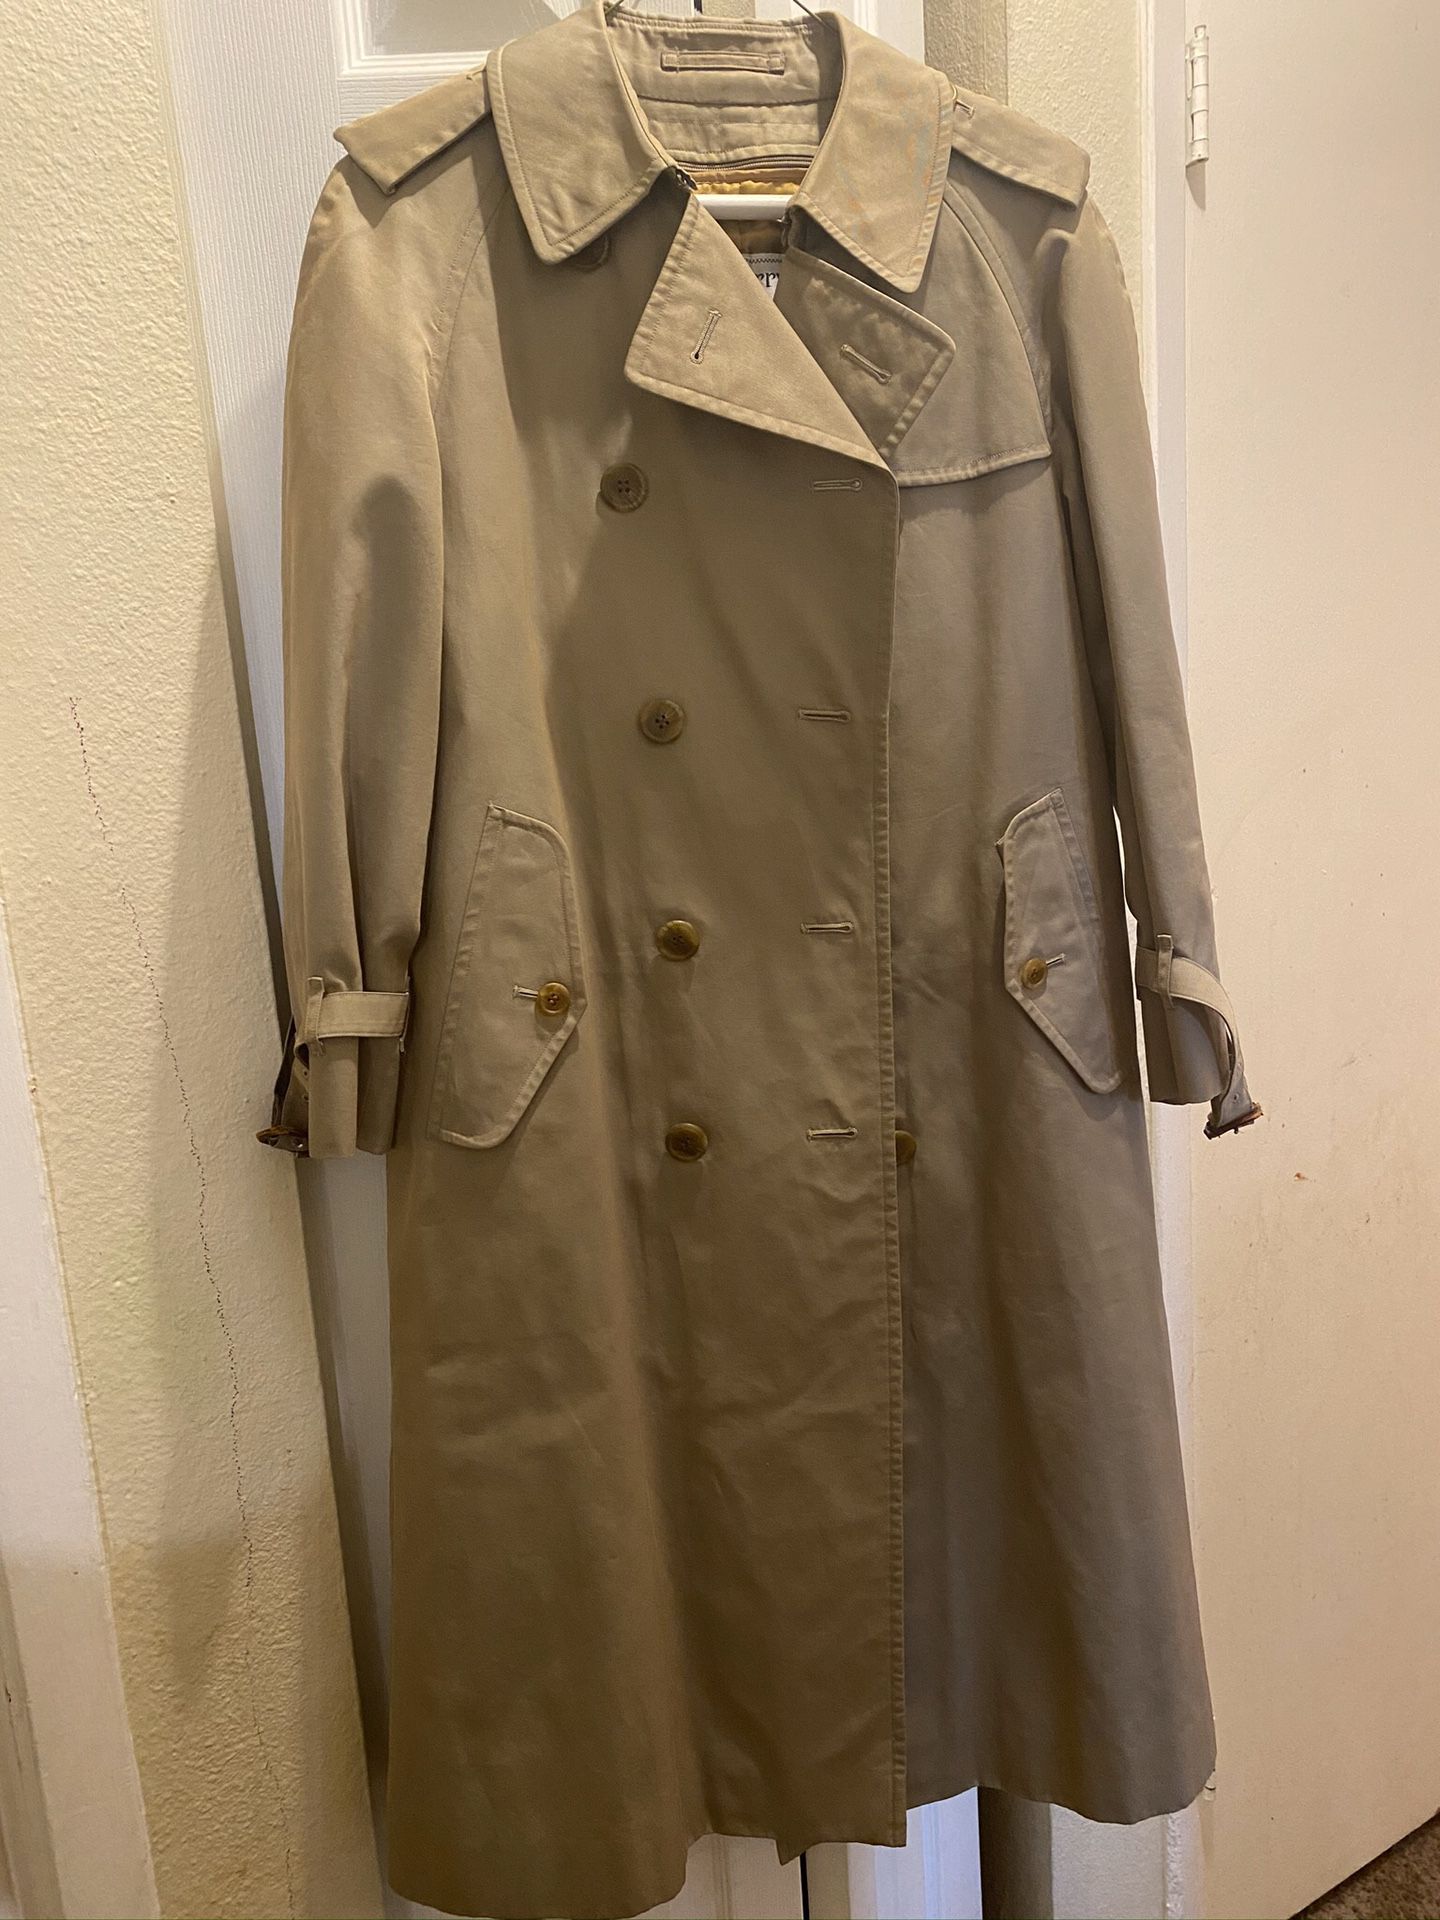 burberry trench coat size woman L